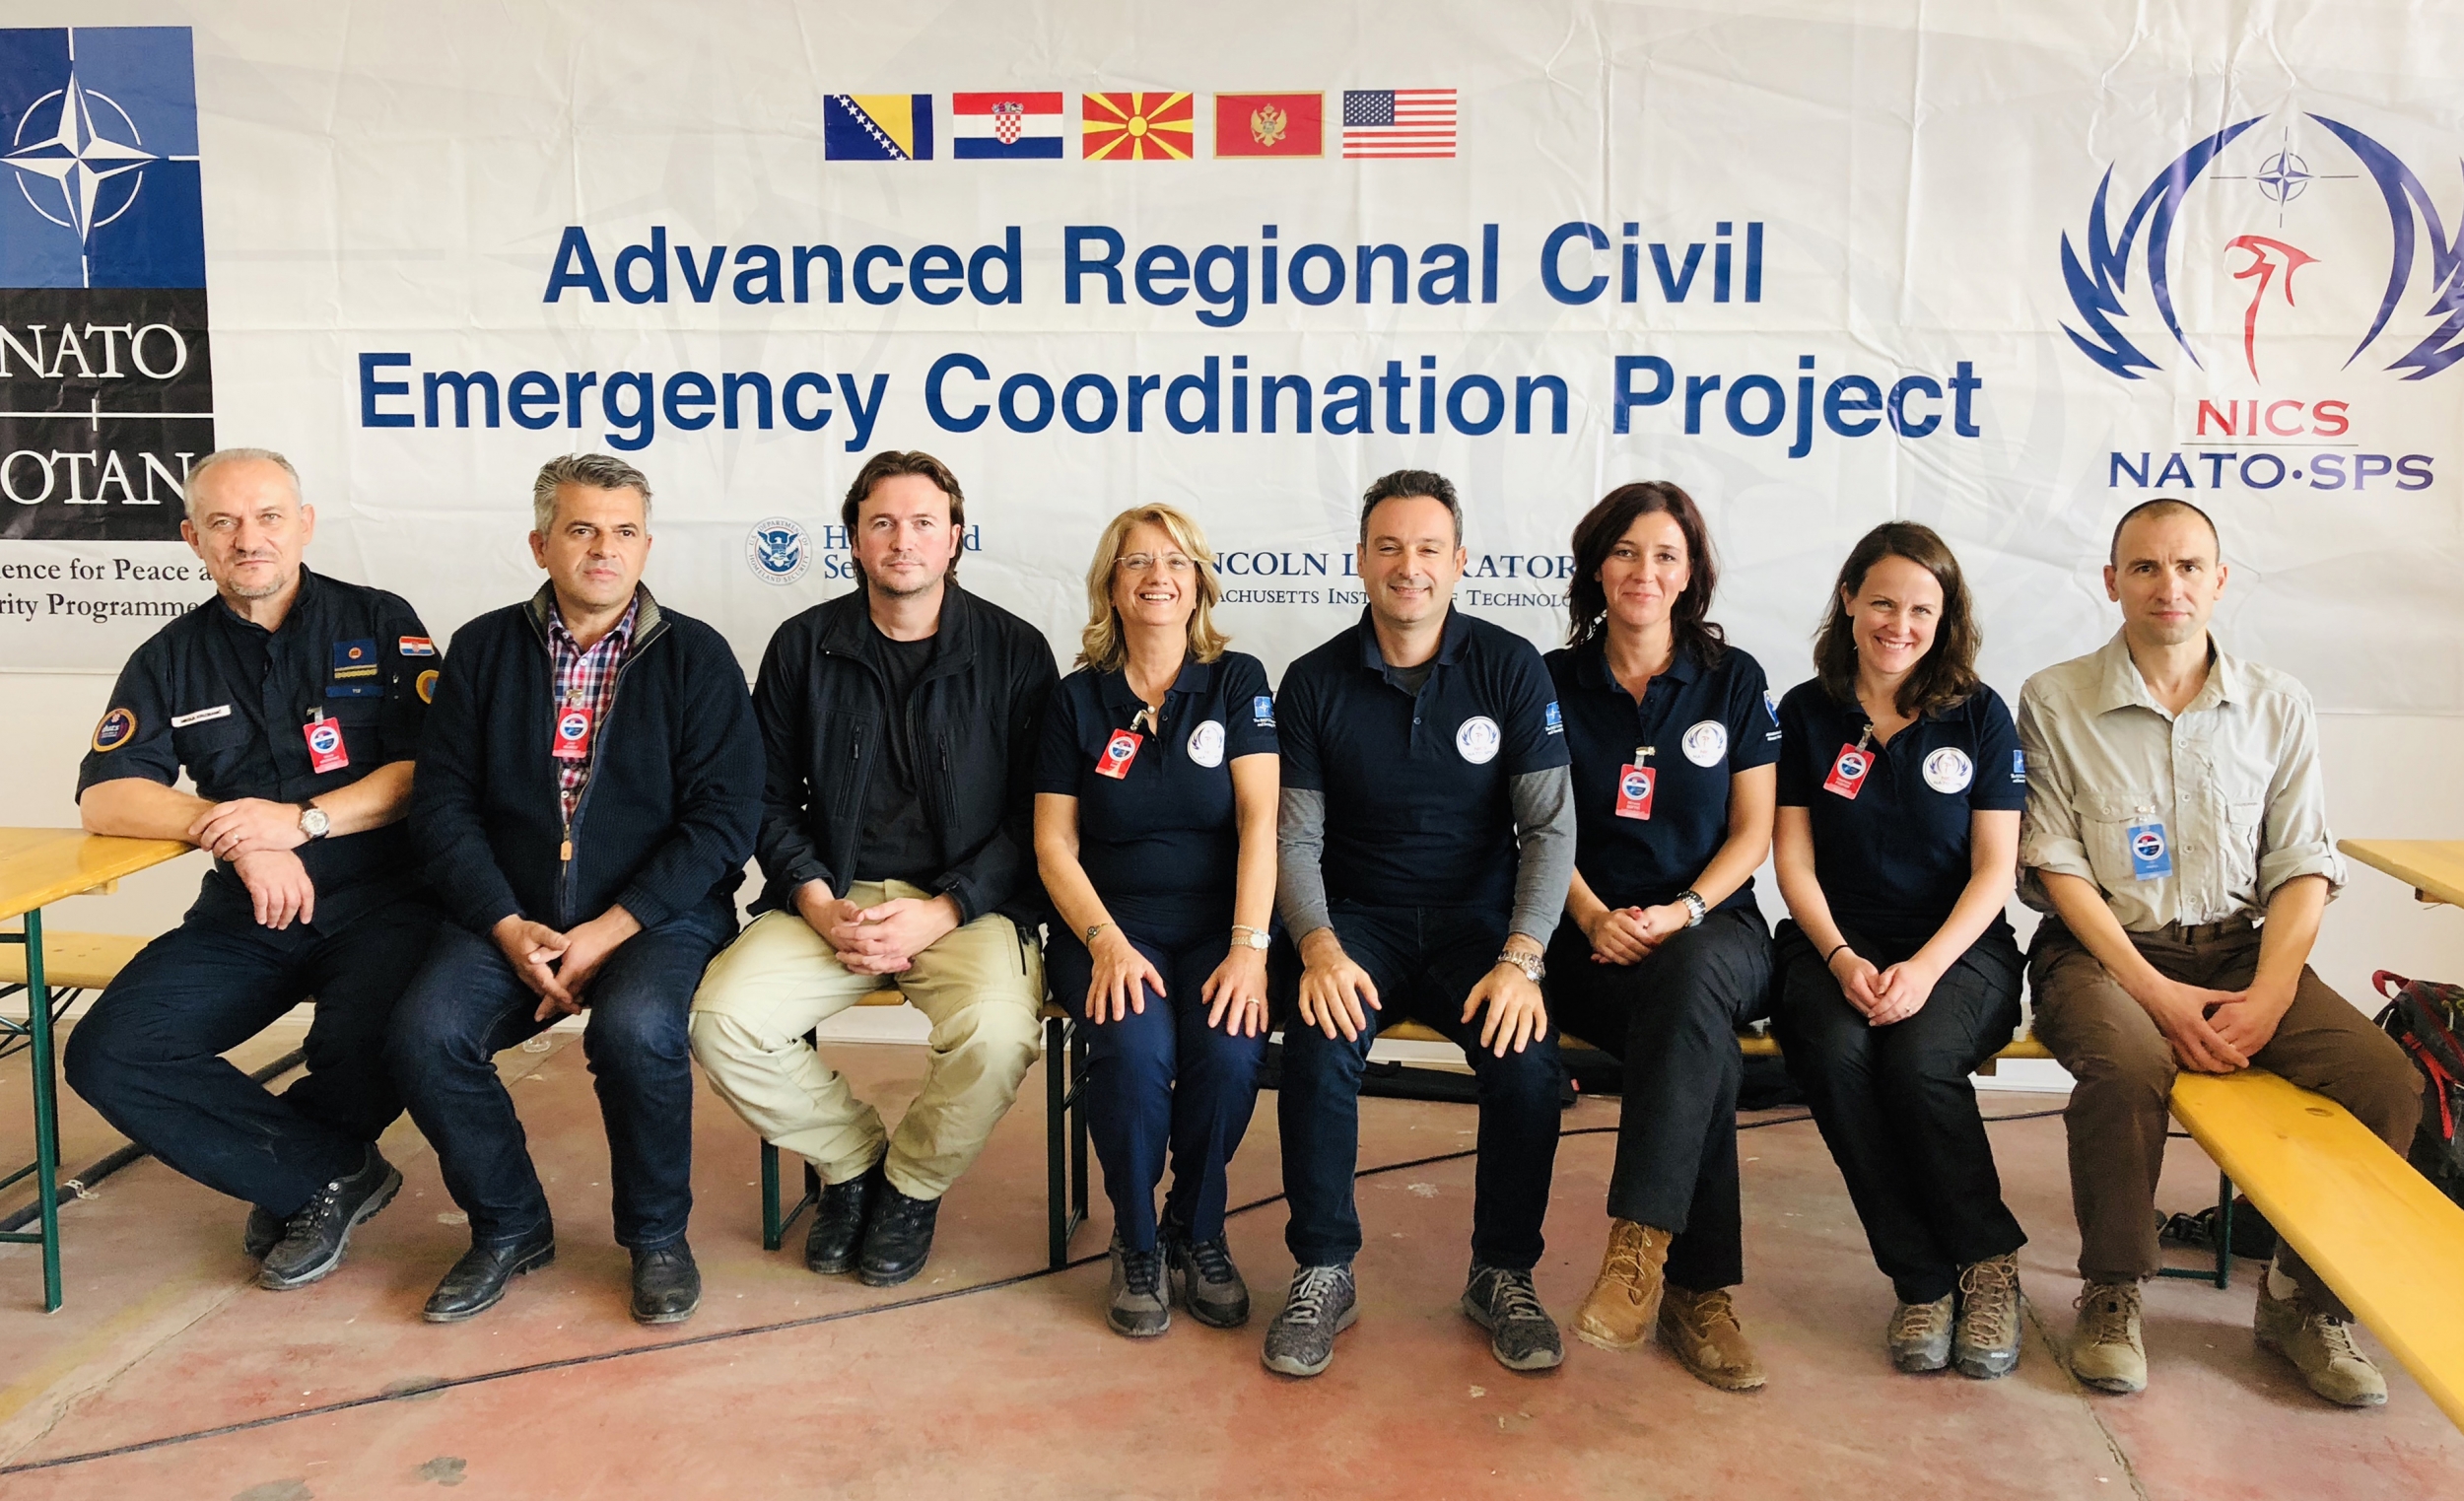 National Protection and Rescue Directorate (Croatia), Crisis Management Center (former Yugoslav Republic of Macedonia), Directorate of Emergency Management (Montenegro), Ministry of Security (BiH), MIT LL, and NATO staff collaborated at the exercise. 